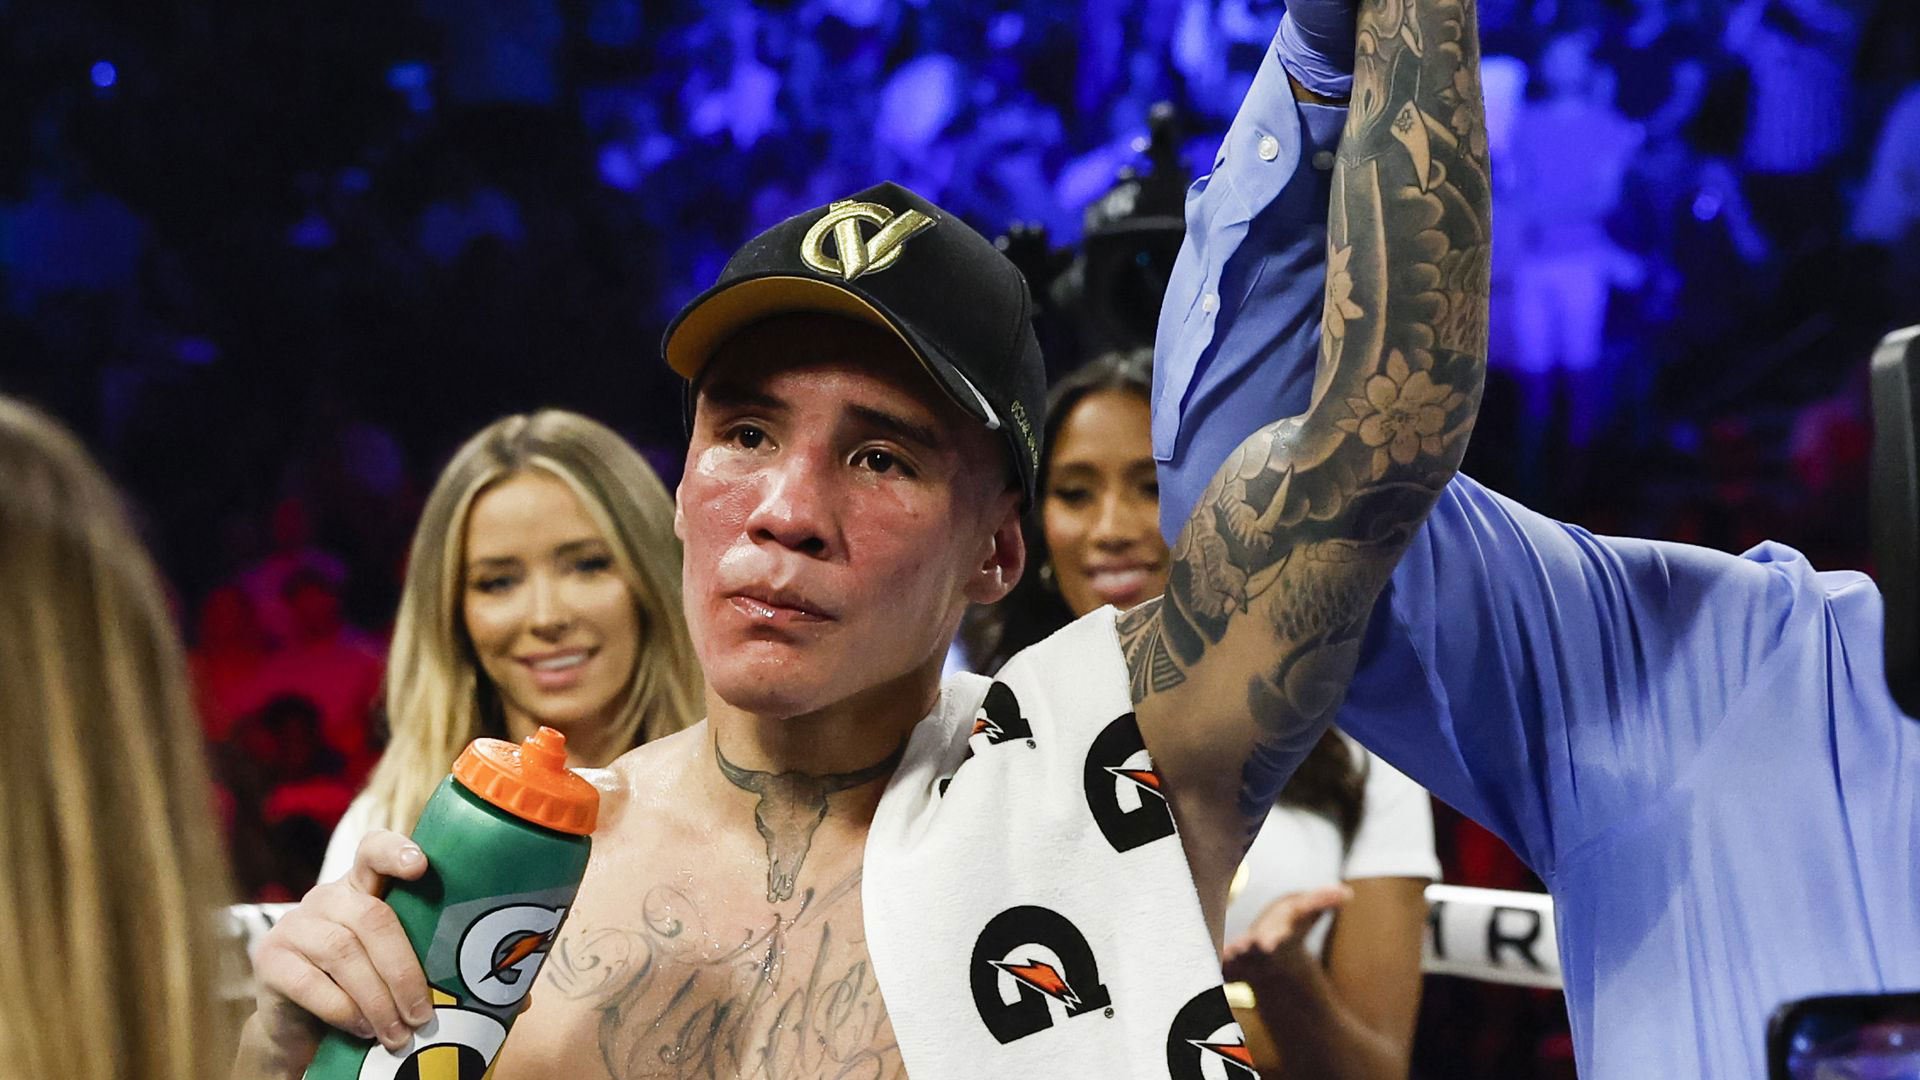 "Oscar Valdez vs Liam Wilson" High Stakes Showdown And More Exciting Fights Await In Glendale